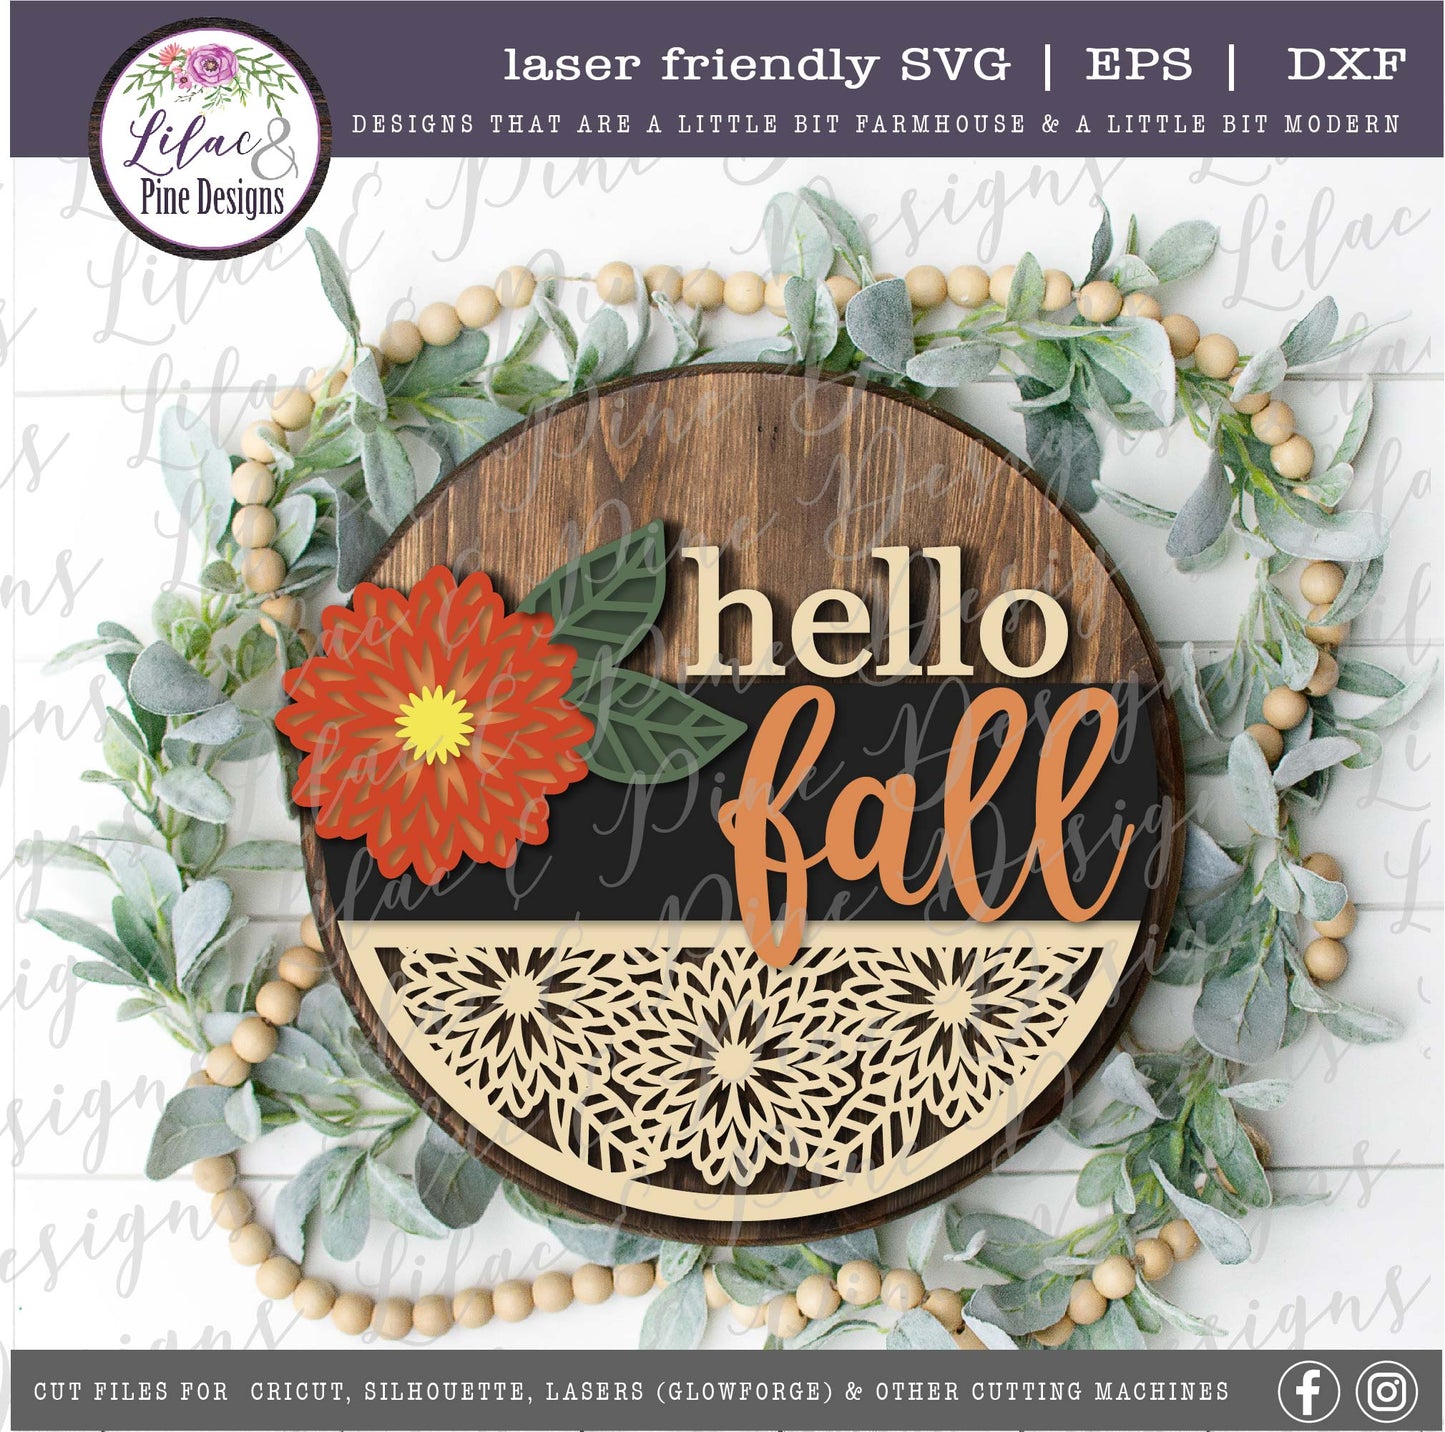 Hello Fall sign SVG, Fall Mums SVG, fall floral SVG, porch decor sign, Glowforge SVG, laser cut file